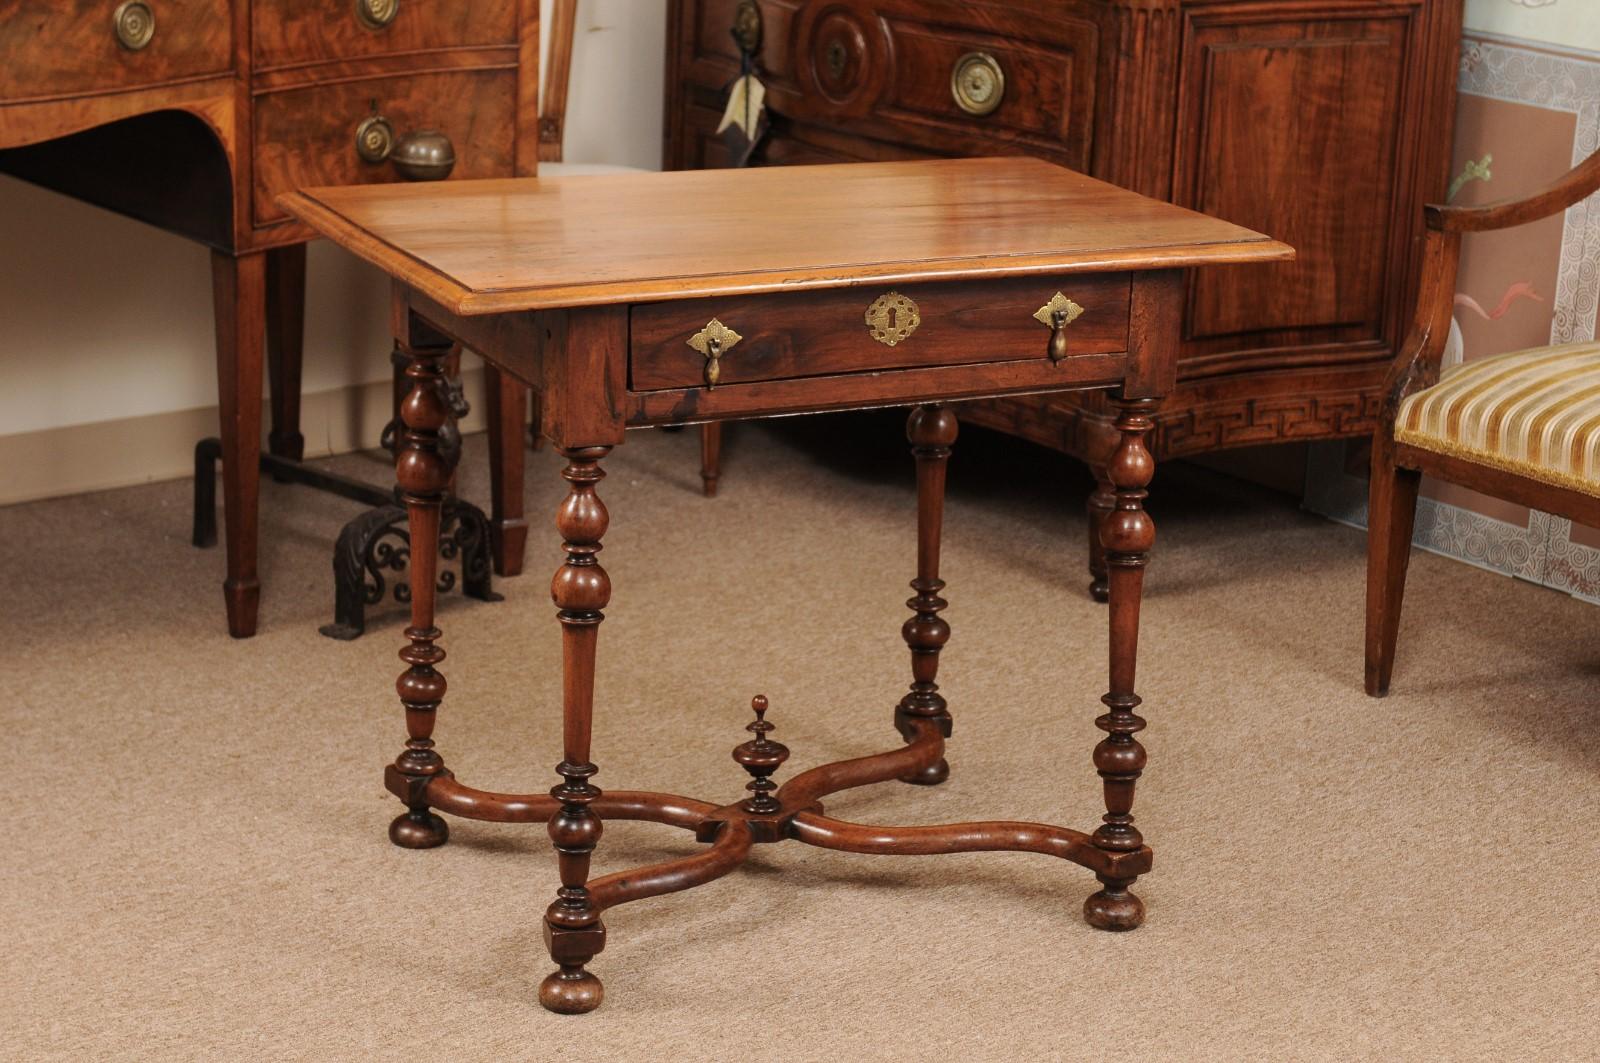 Walnut side table with one (1) drawer, turned legs, and X-form stretcher featuring finial, 18th century, England.